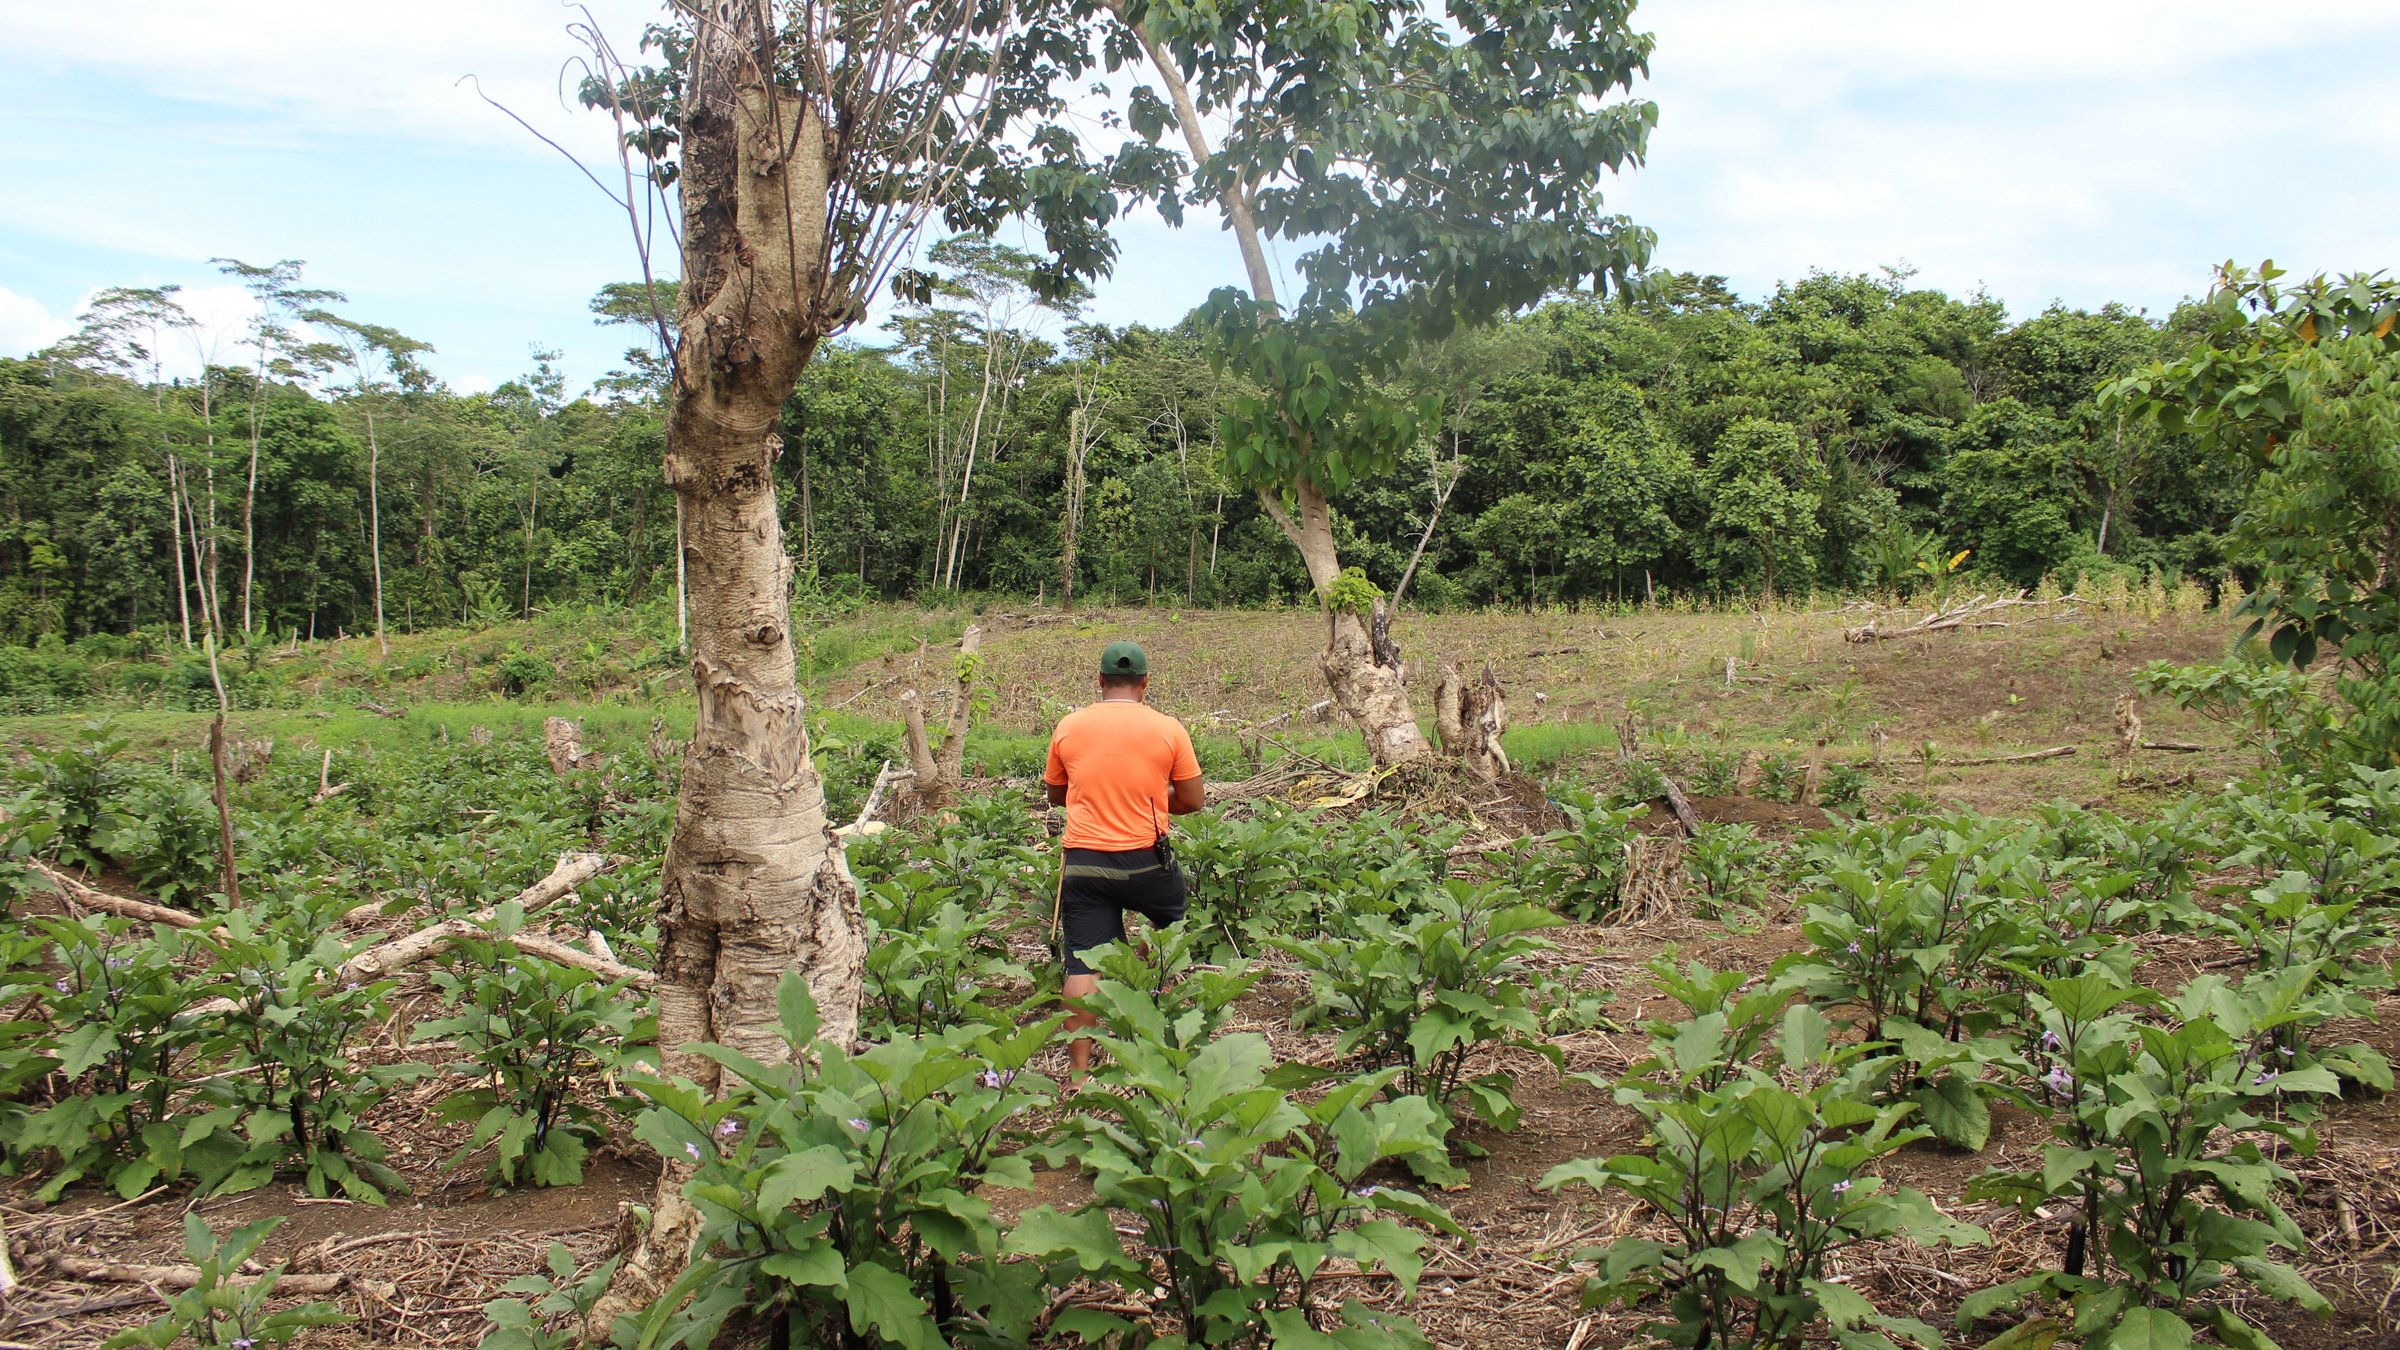 Agriculture in the Kasapa community